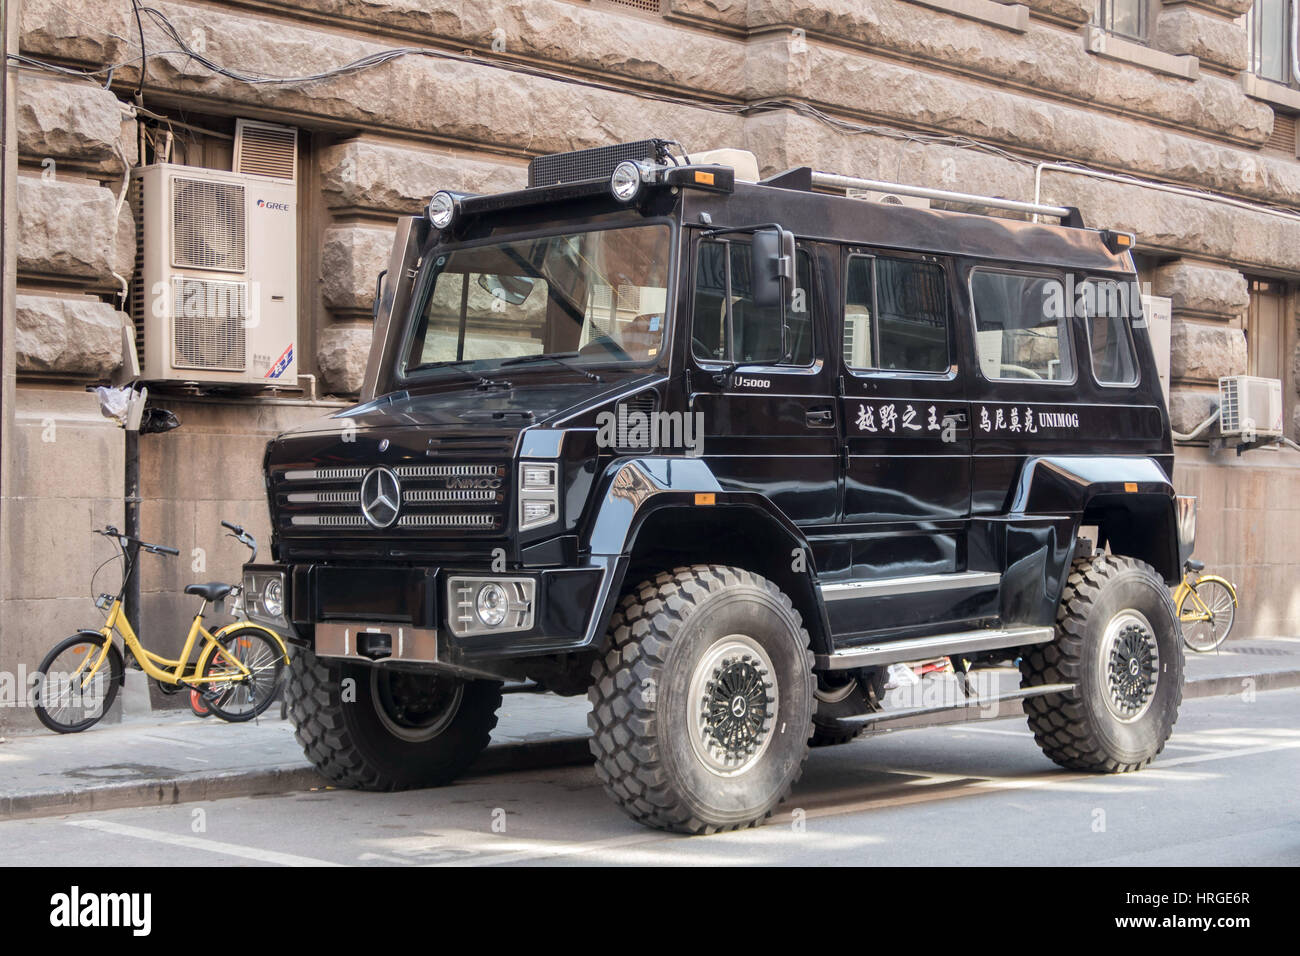 Shanghai, Shanghai, China. 2nd Mar, 2017. The Unimog U 5000 attracts attention of many passers-by in Shanghai, March 2nd, 2017. The Mercedes-Benz Unimog is about 3 meters tall. Credit: SIPA Asia/ZUMA Wire/Alamy Live News Stock Photo